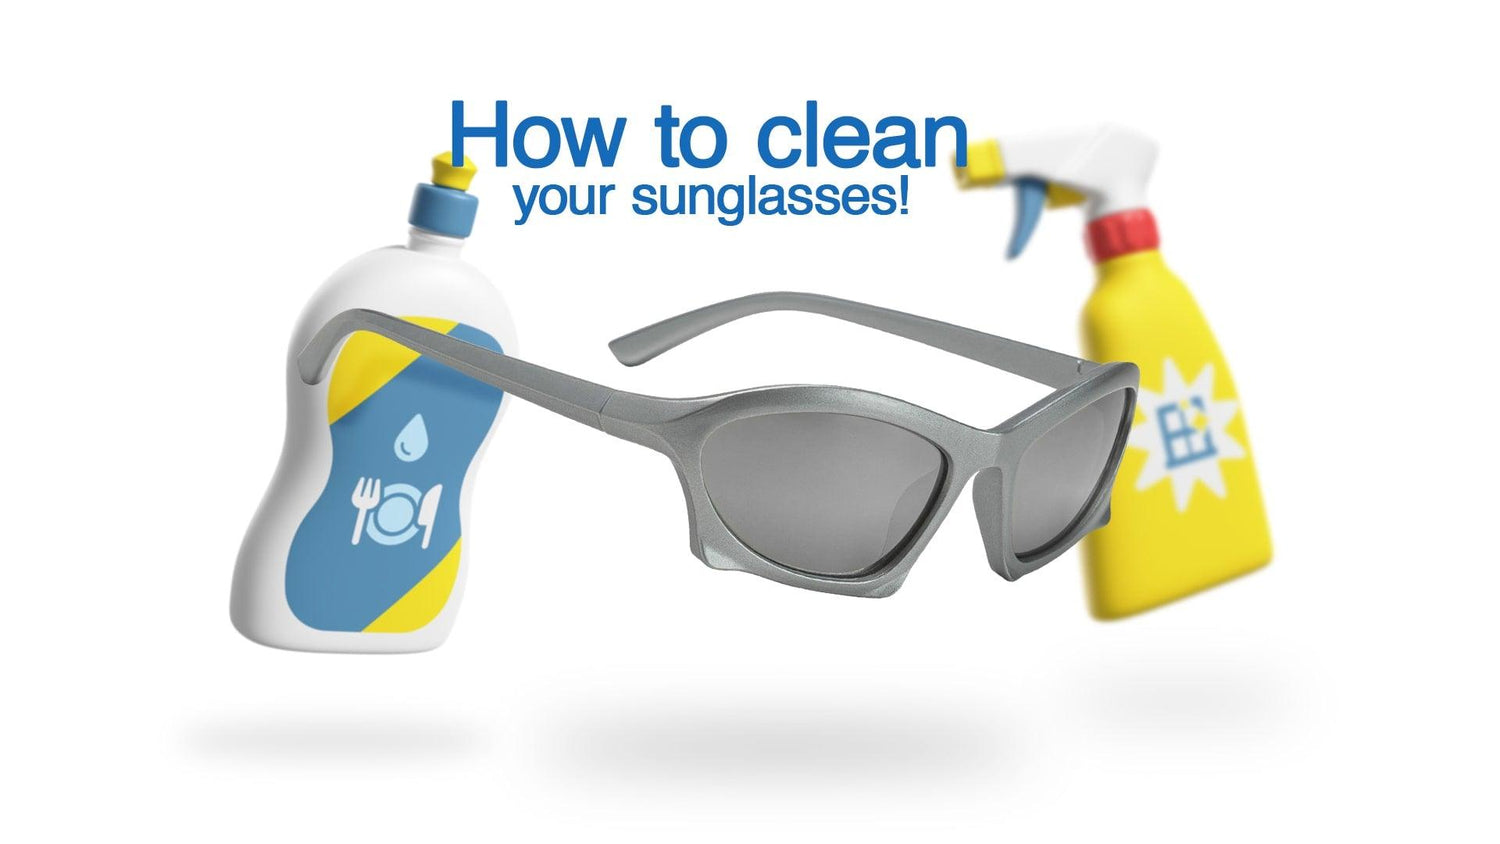 How To Clean Your Sunglasses